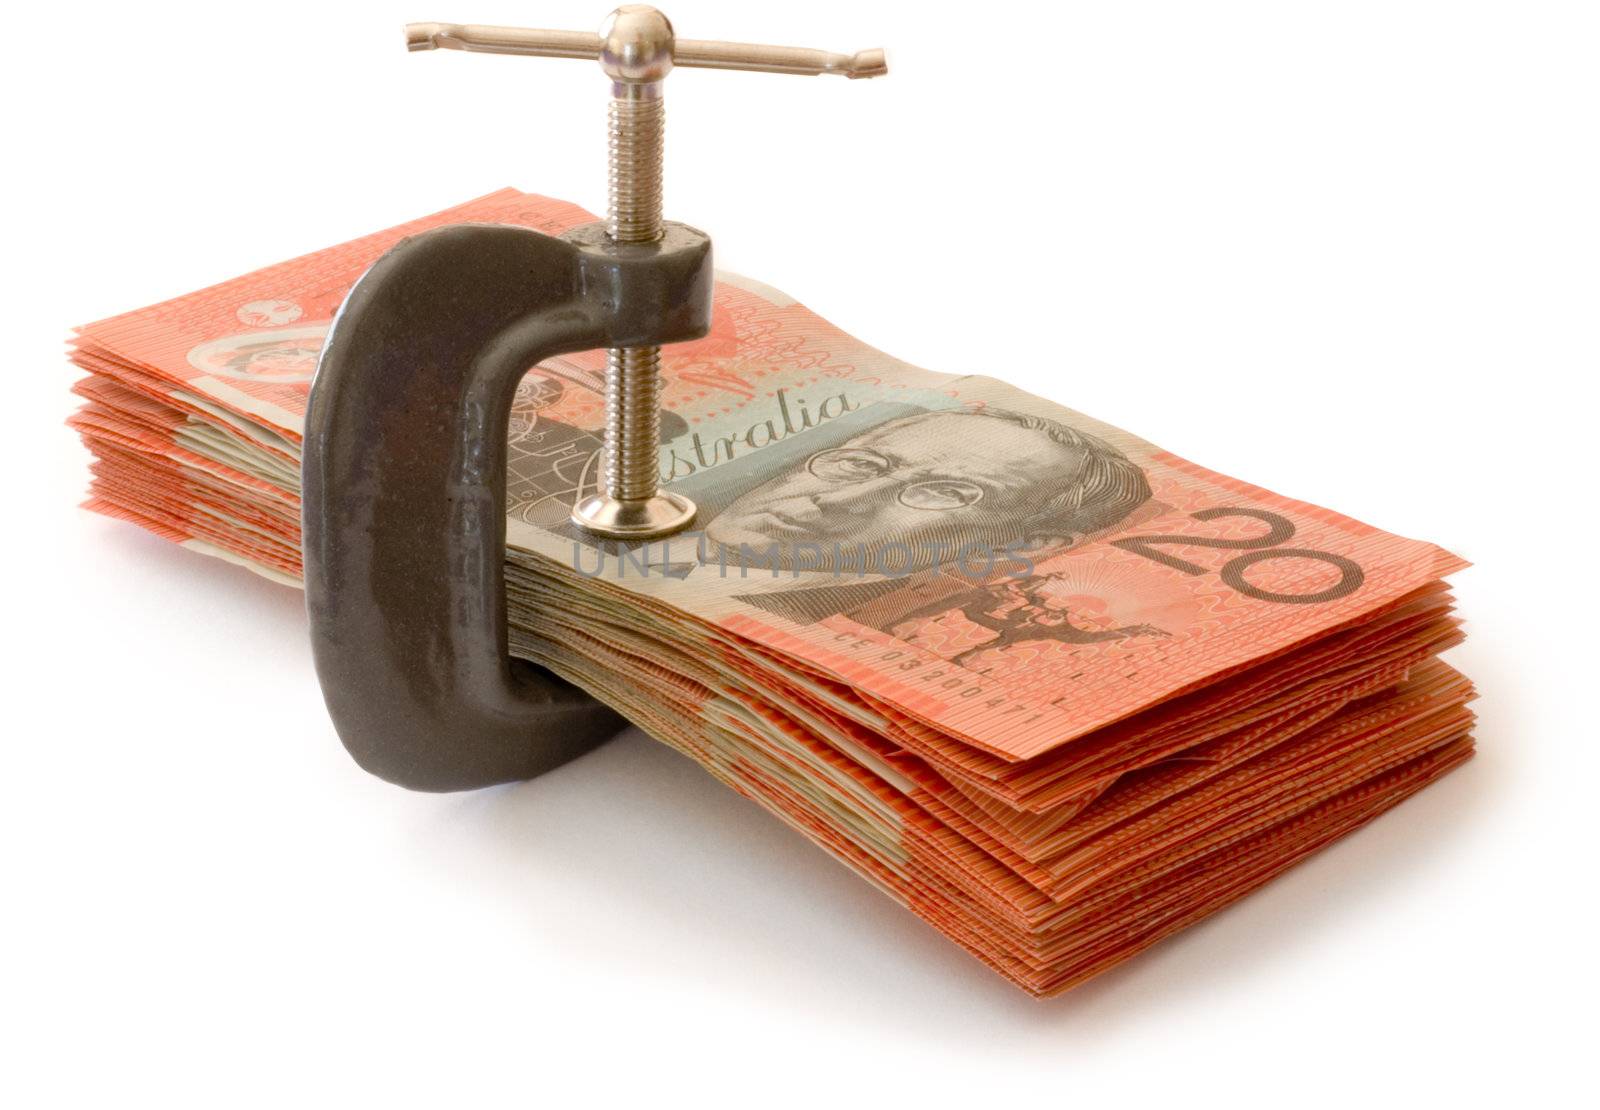 Australian banknotes in a g-clamp, metaphor for restriction on spending